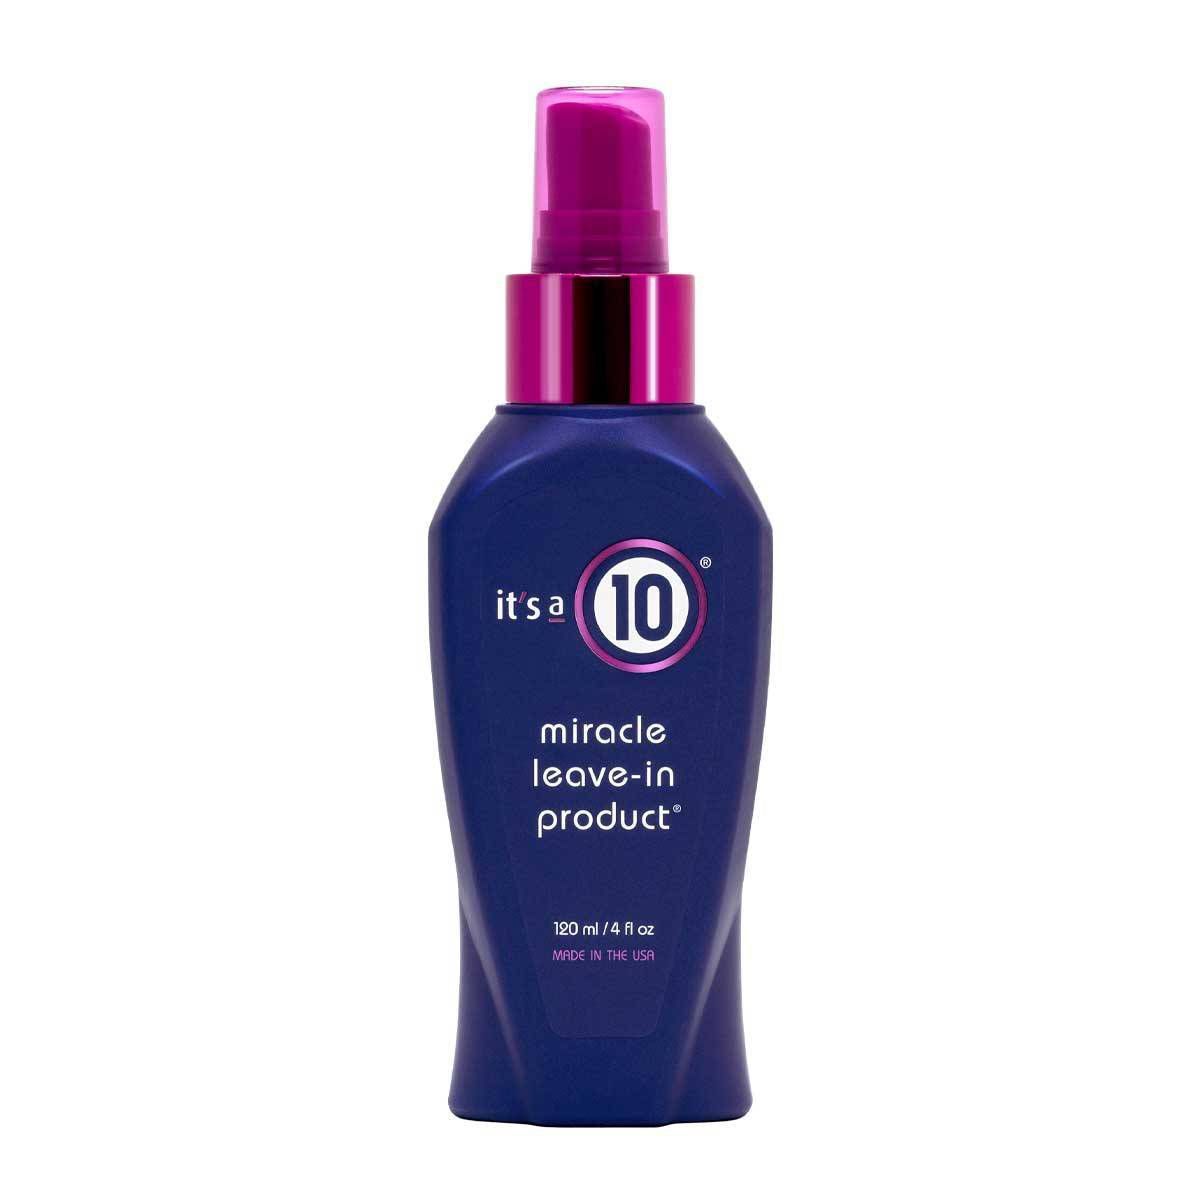 It's a 10 Miracle Leave-In Conditioner | Target